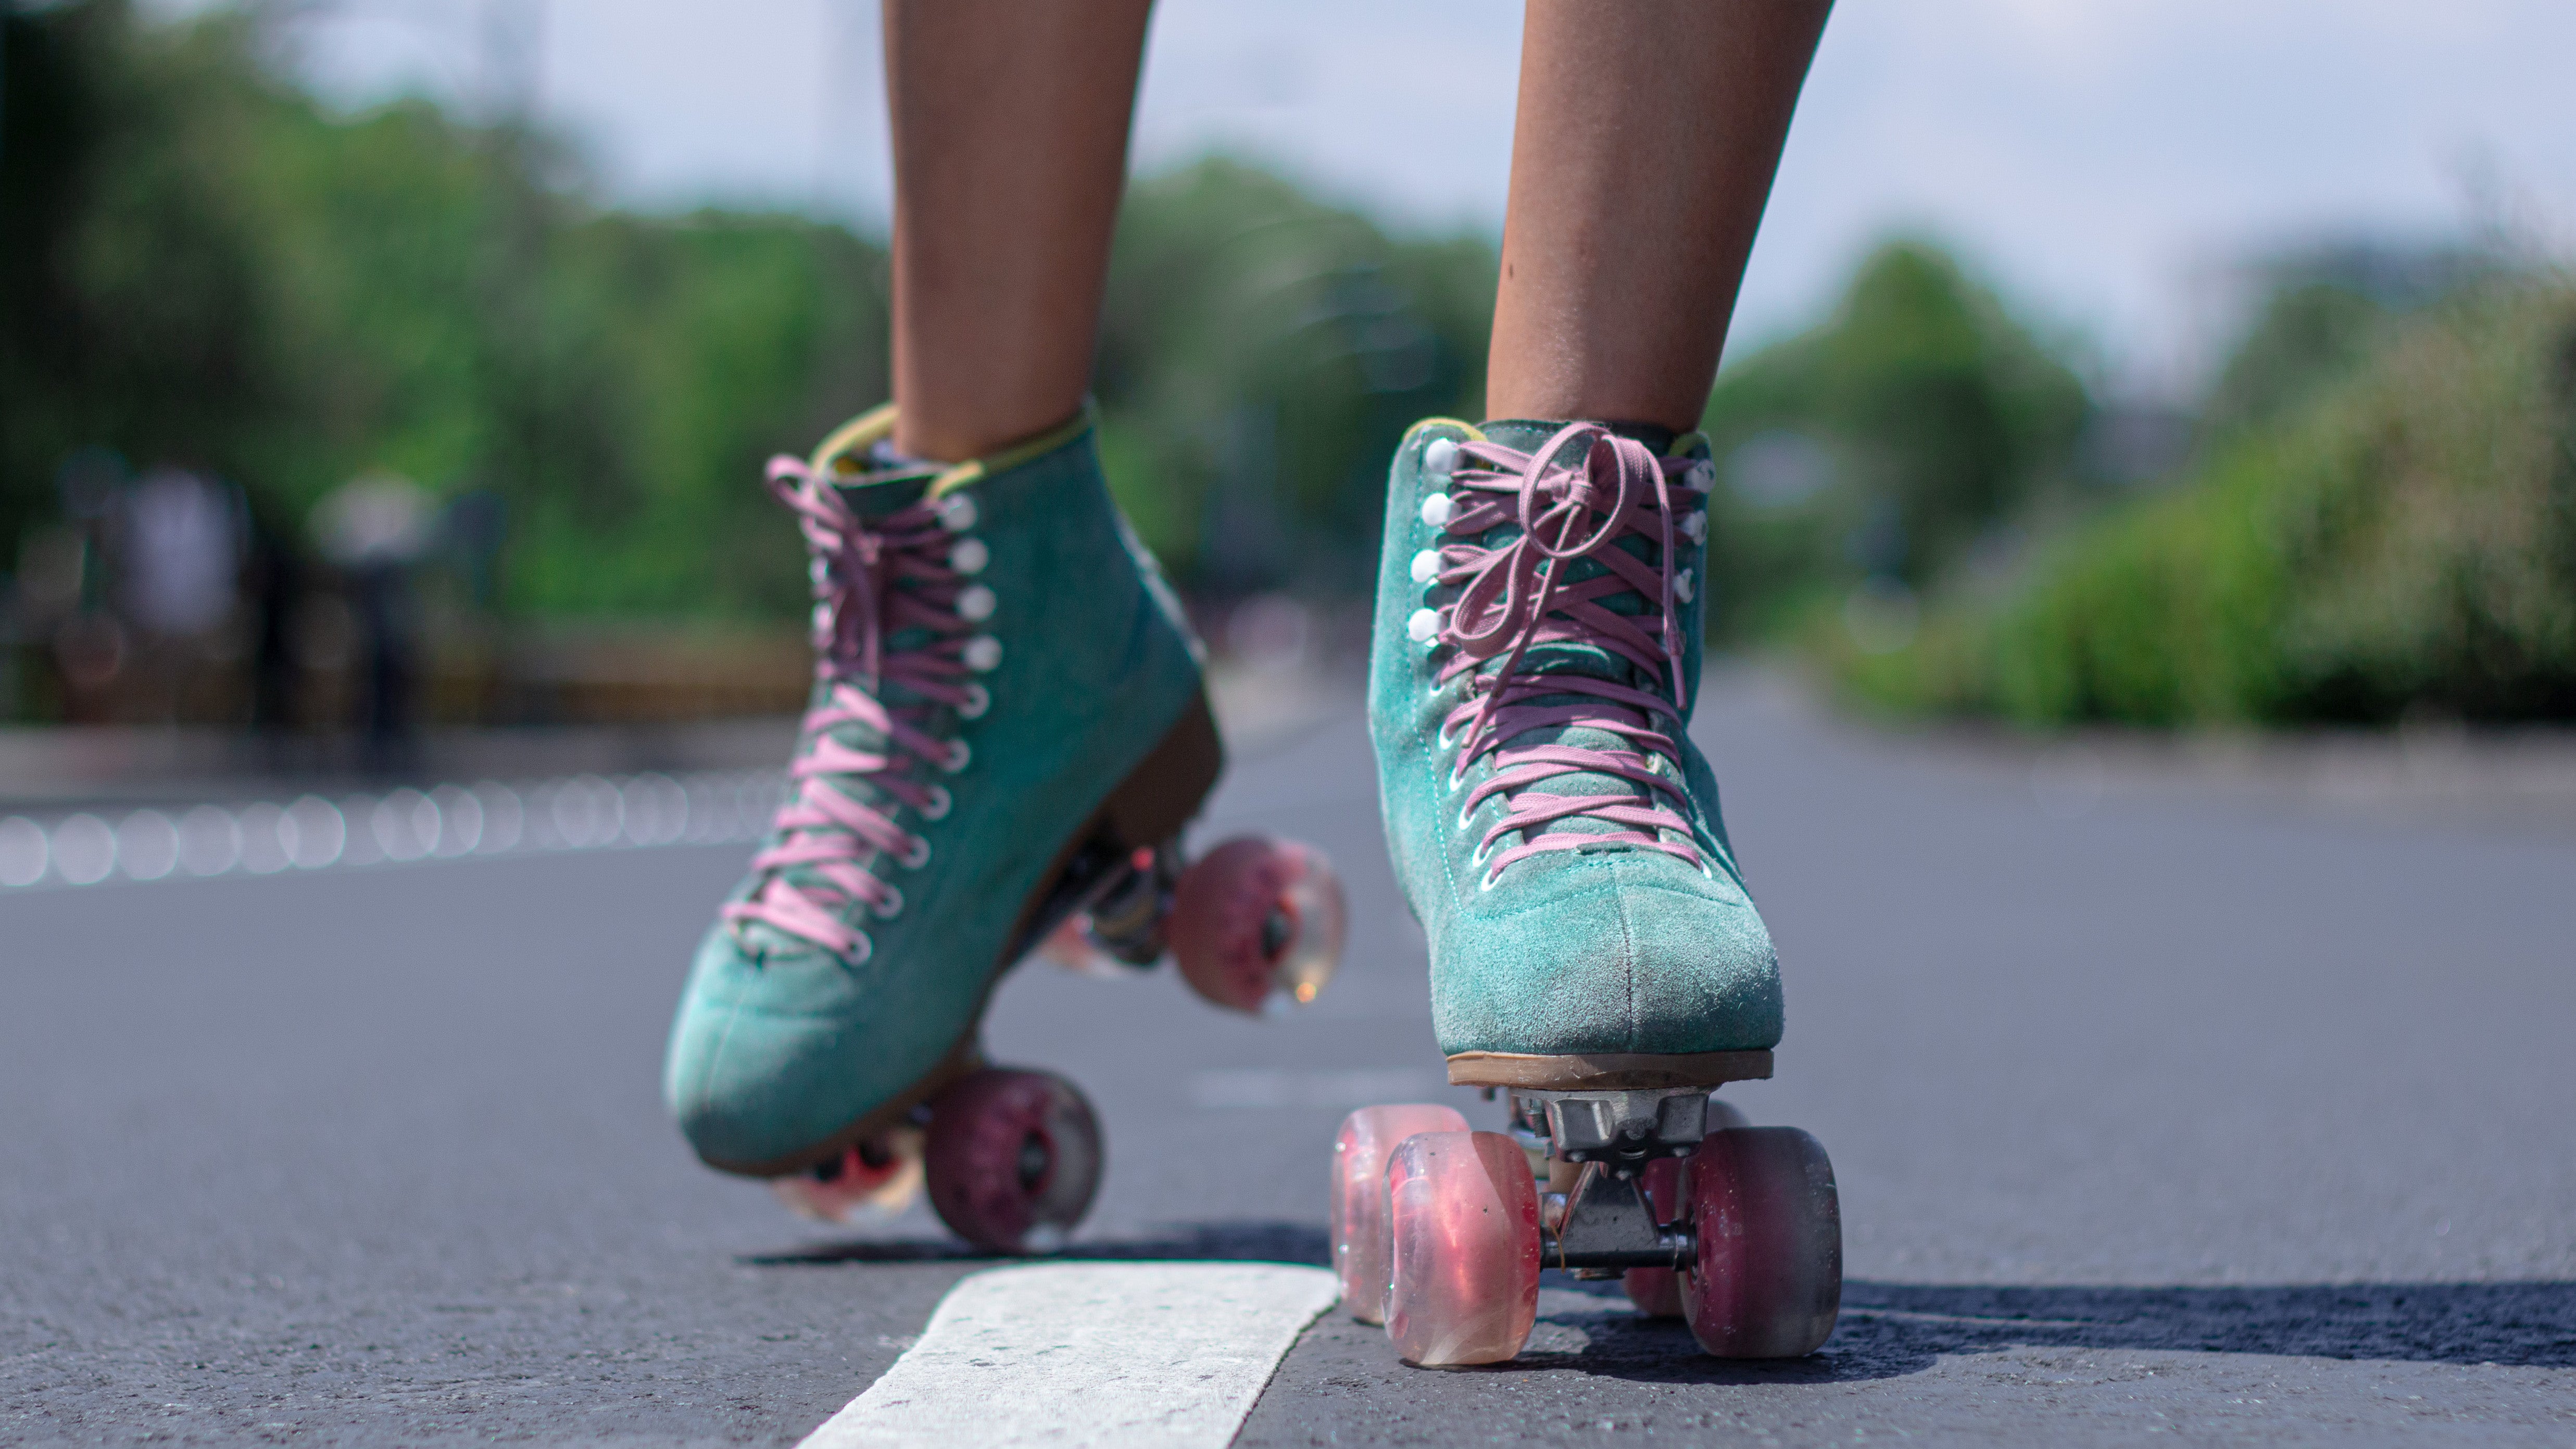 How To Start Roller Skating Without Breaking Anything